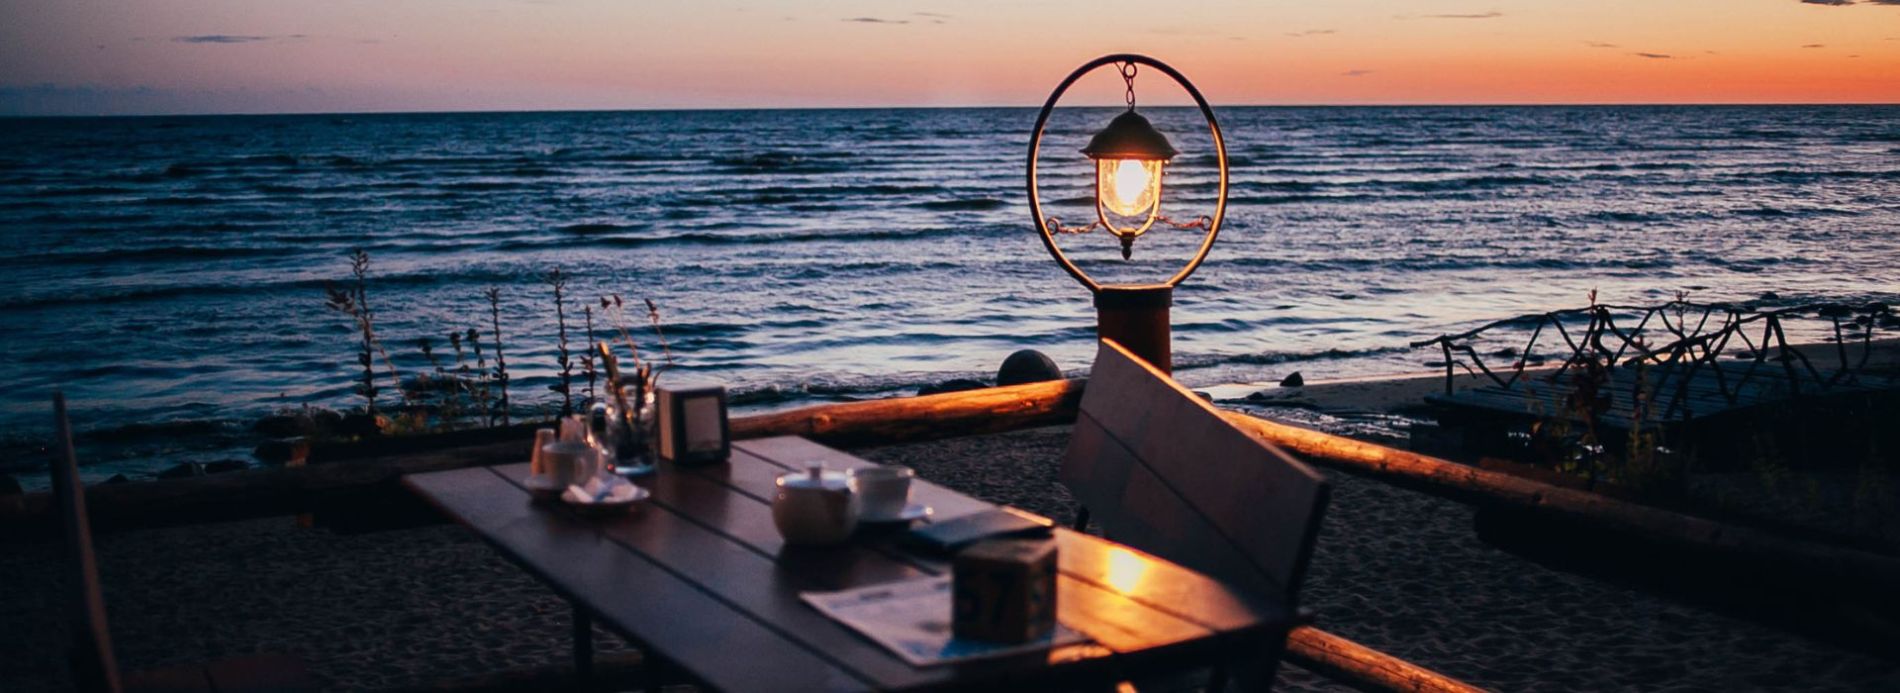 Waterfront dining at sunset